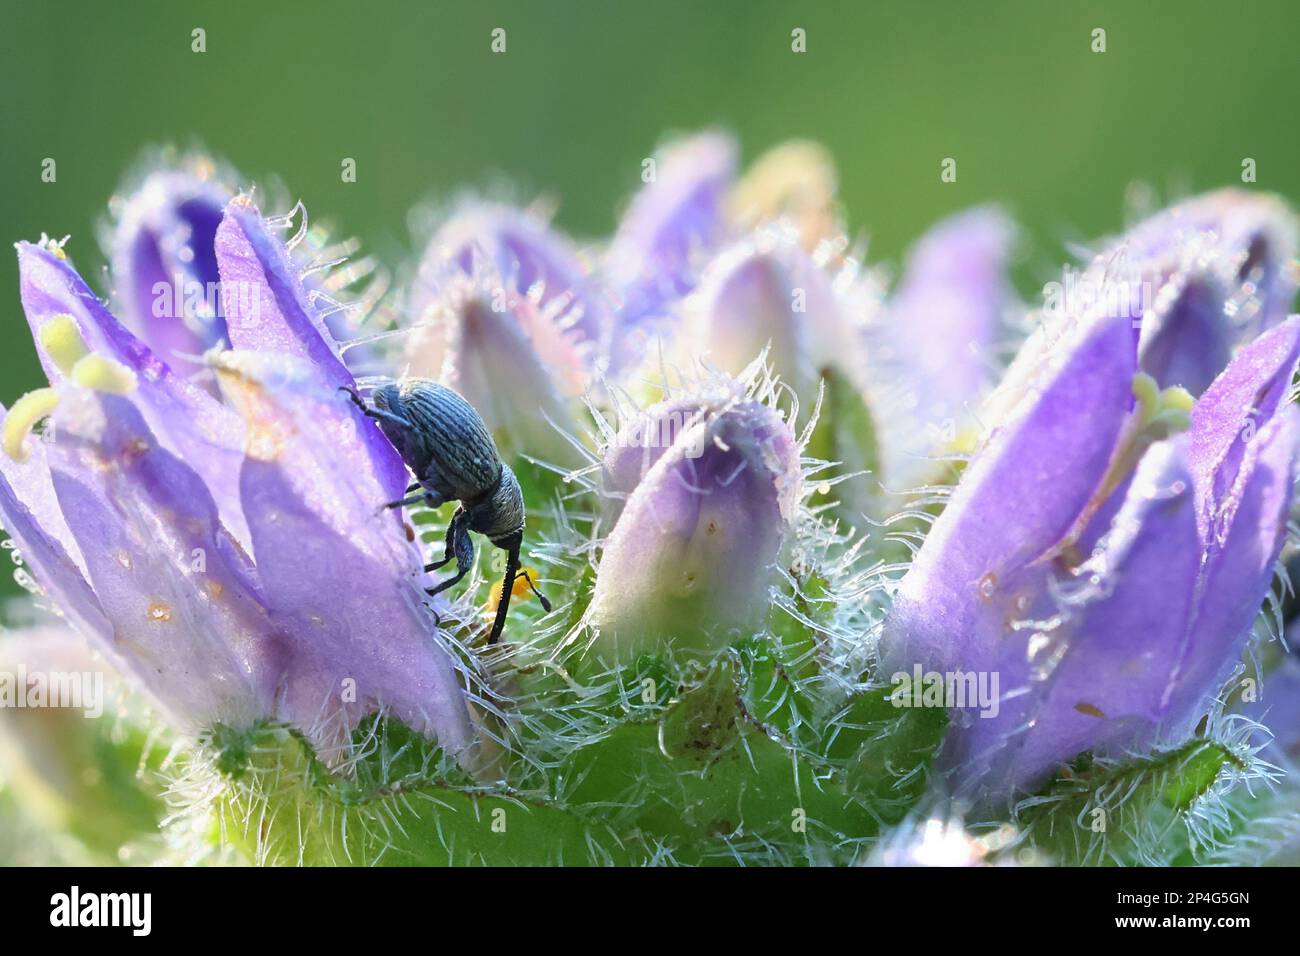 Campanula cervicaria, commonly known as Bristly Bellflower and a feeding weevil, wild plant from Finland Stock Photo